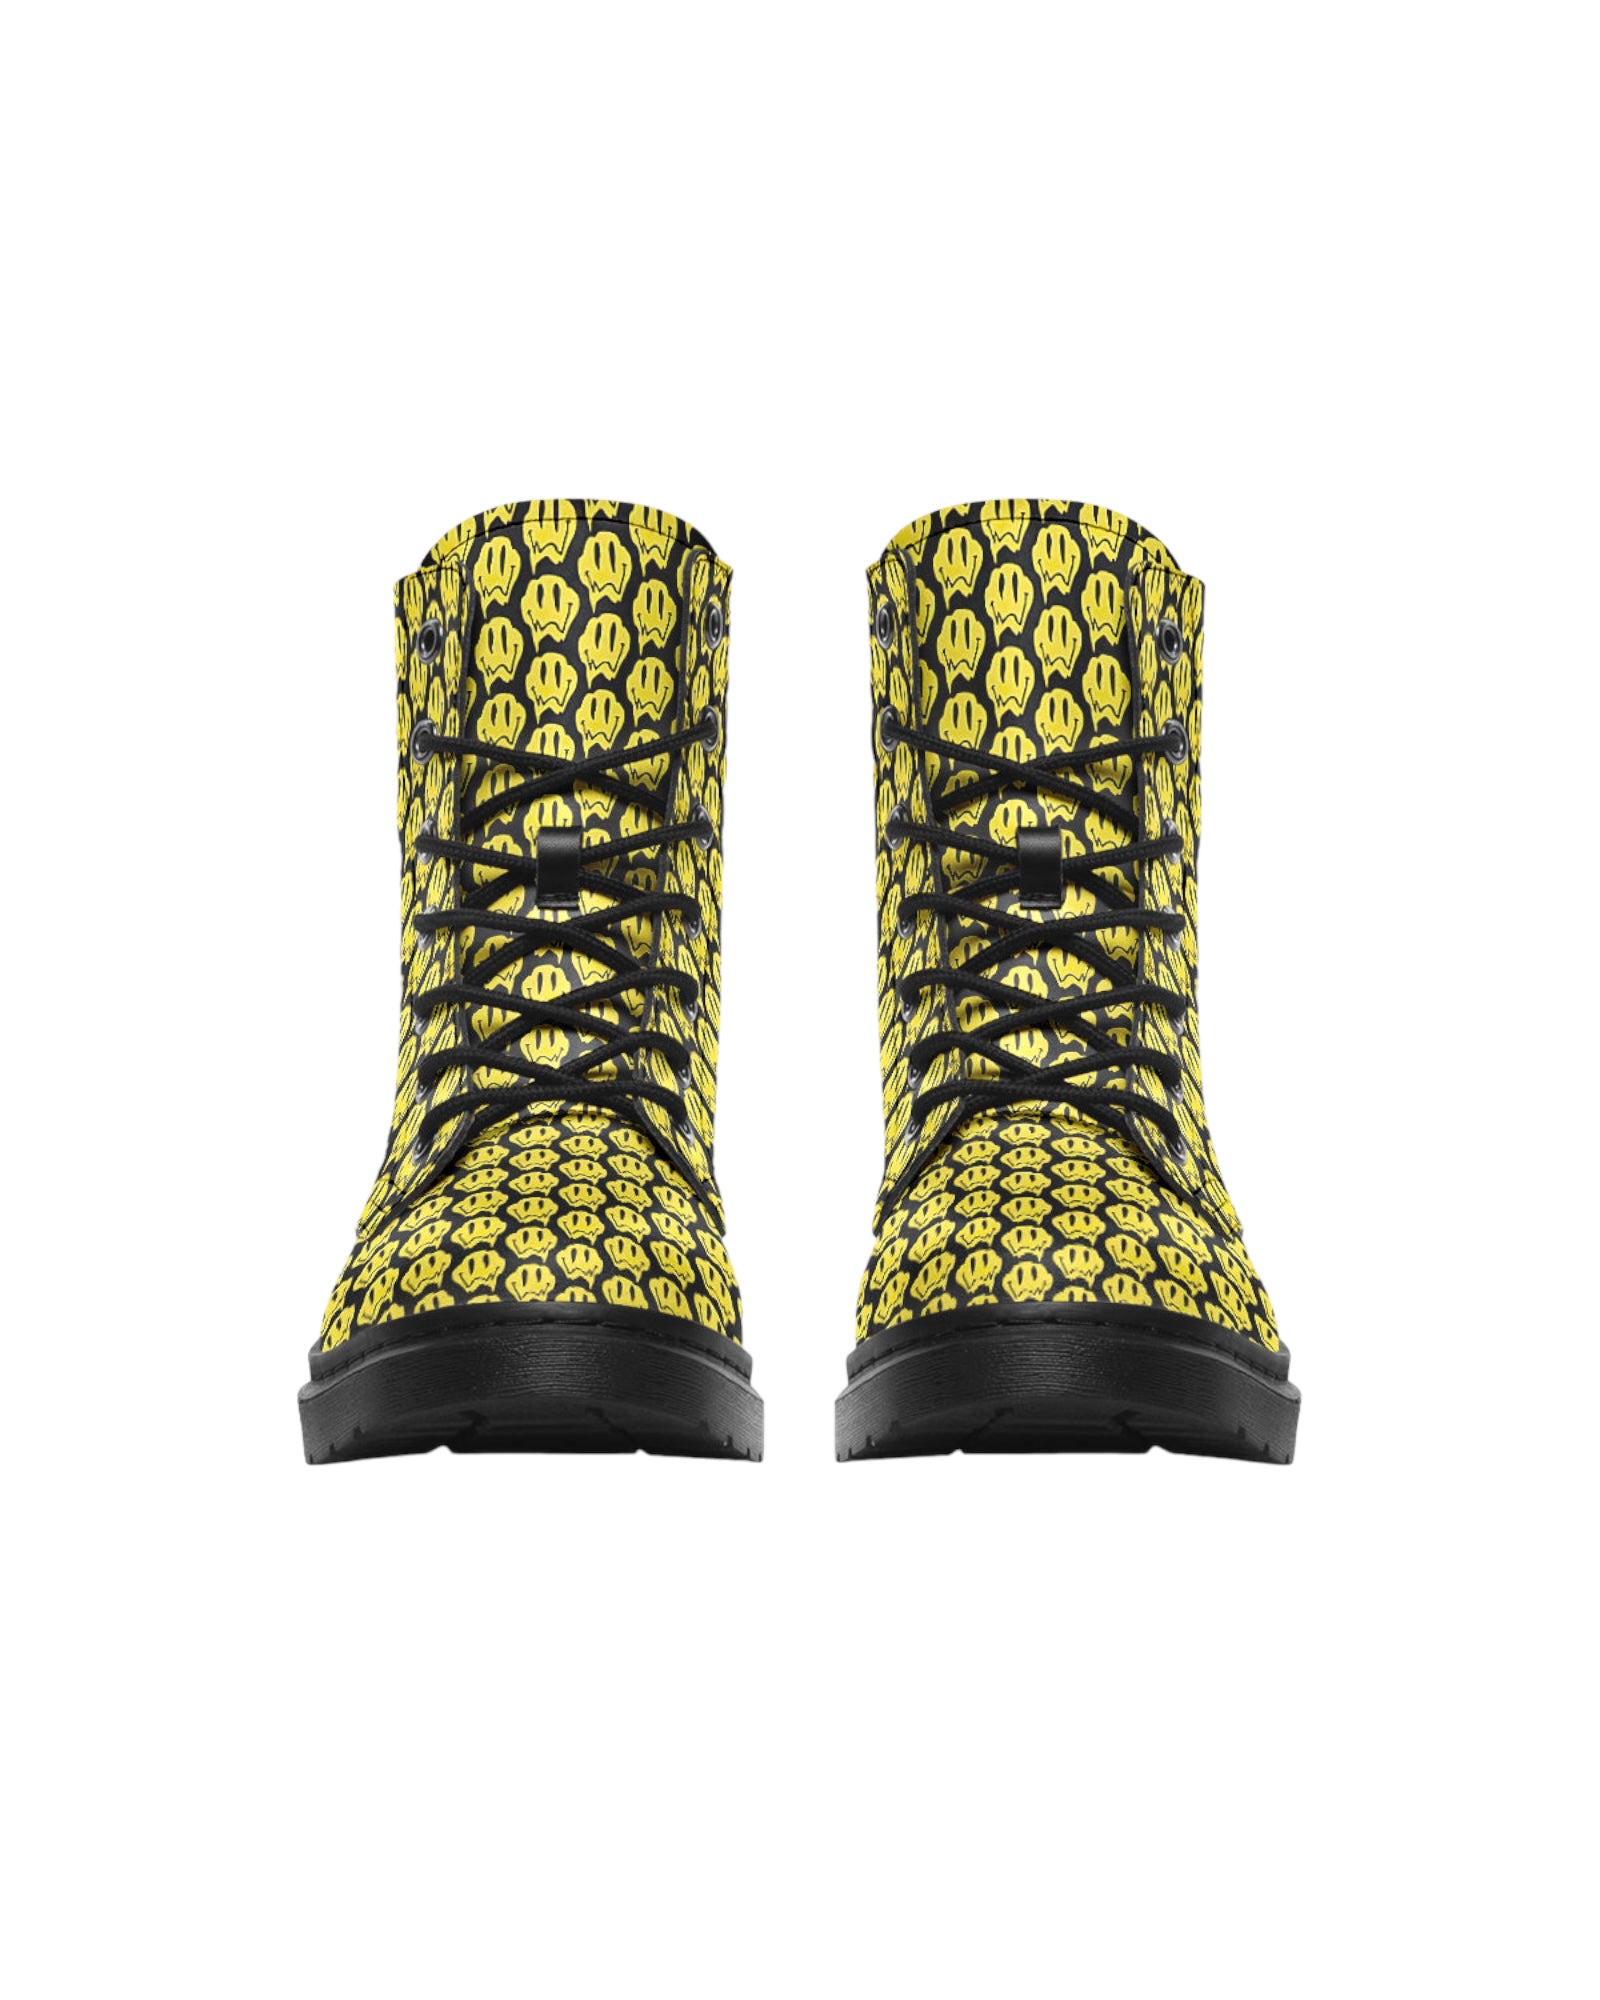 Stay Trippy Combat Festival Boots